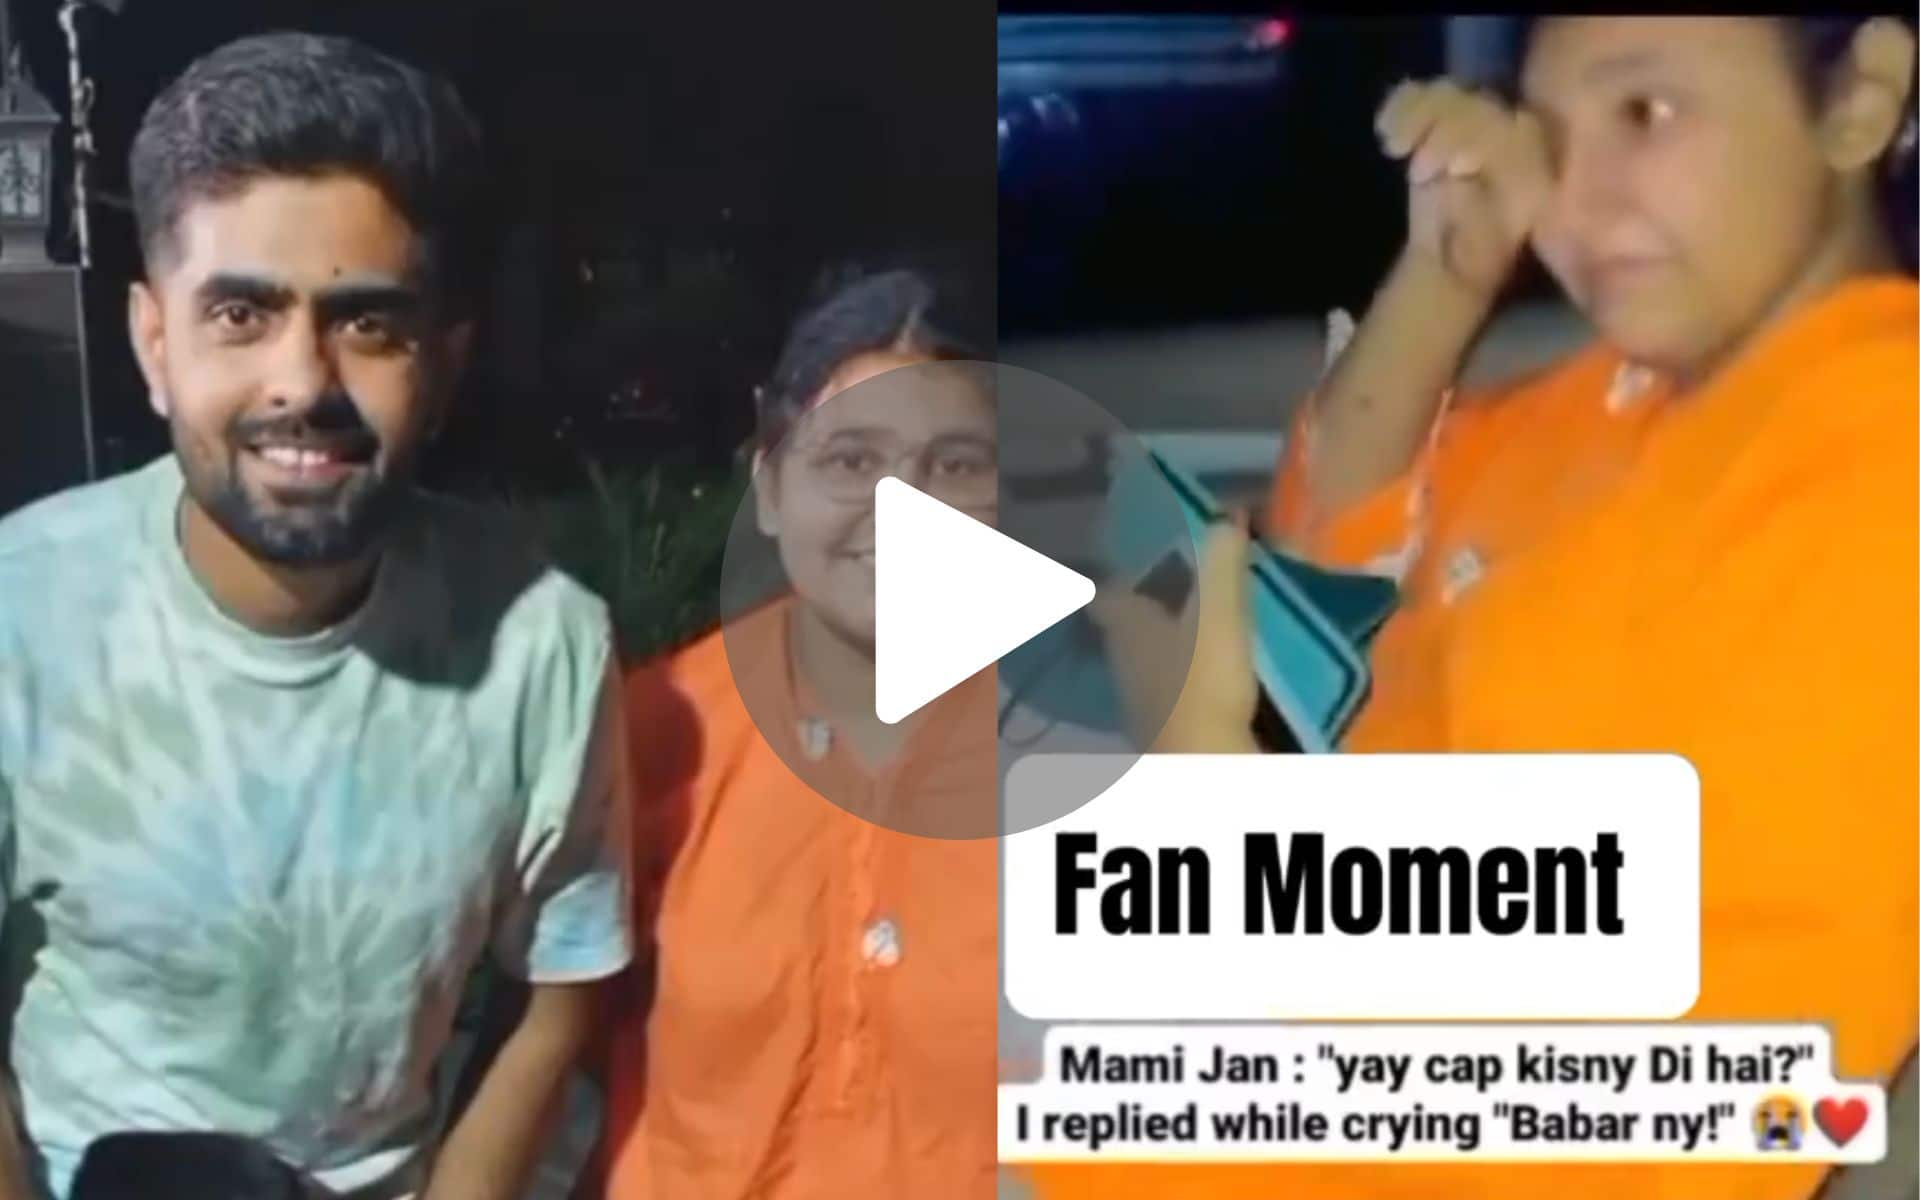 [Watch] Babar Azam's 'Act Of Kindness' Left Young Fan Girl In Tears; Video Goes Viral